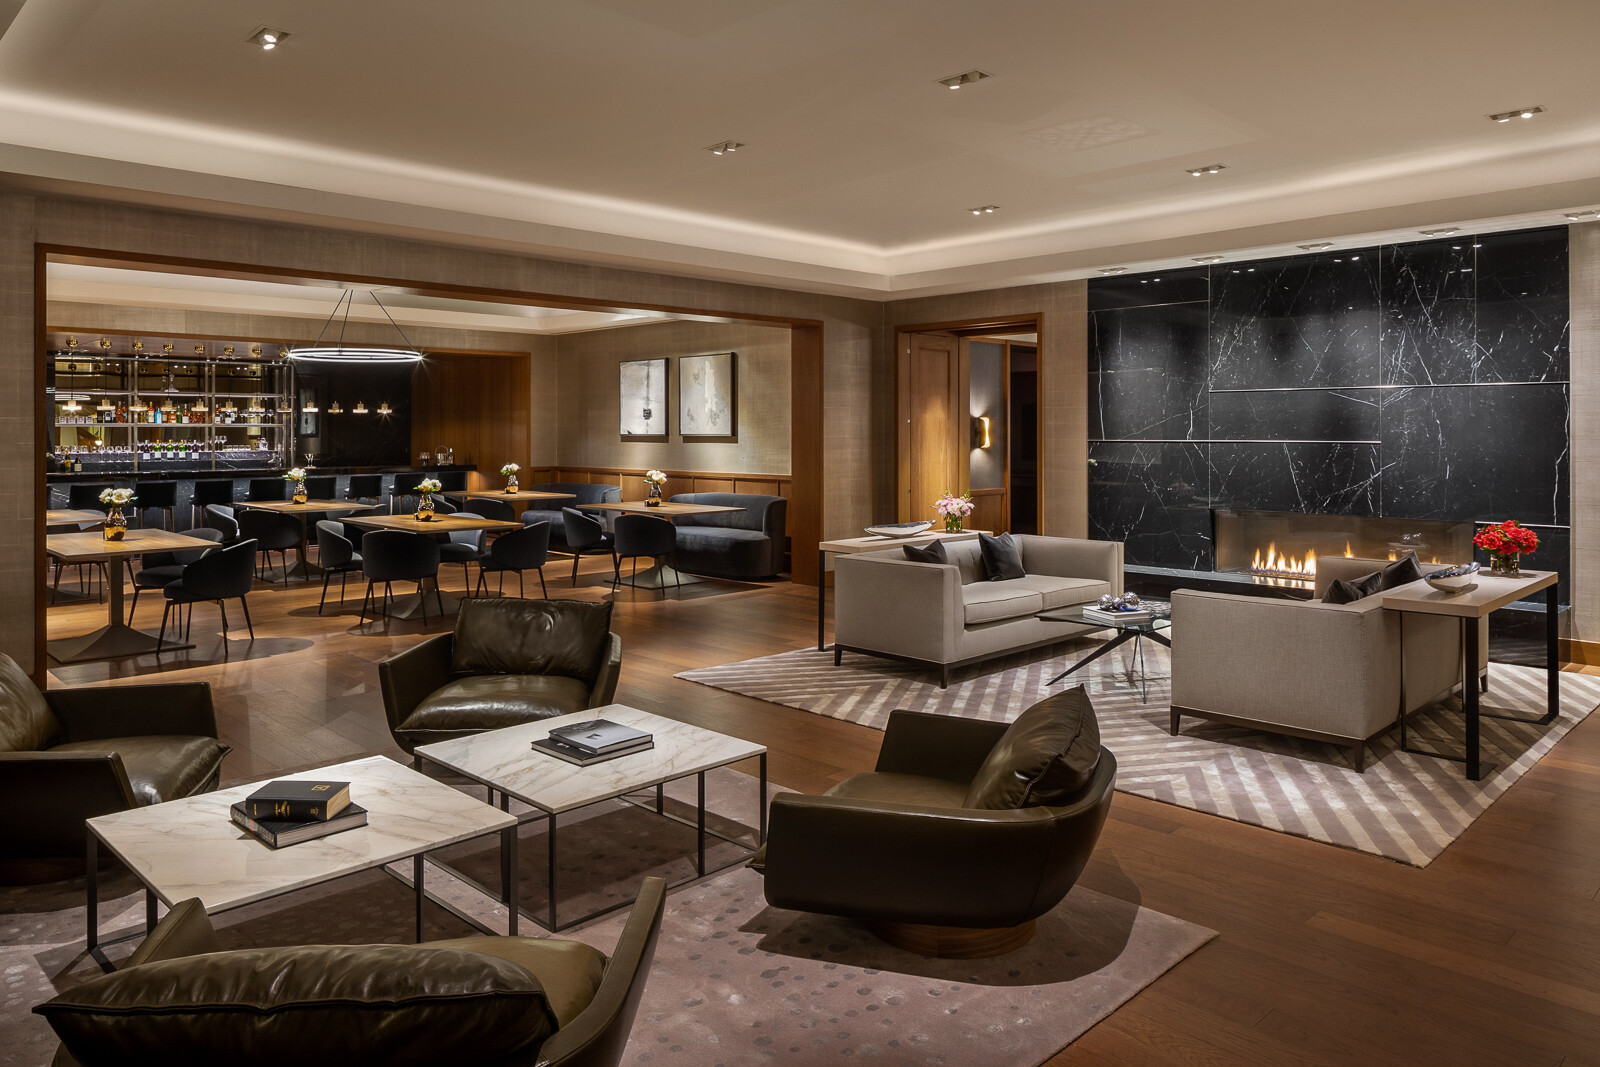 A luxurious, modern hotel lounge with stylish seating areas, a cozy fireplace, and an elegant bar in the background.